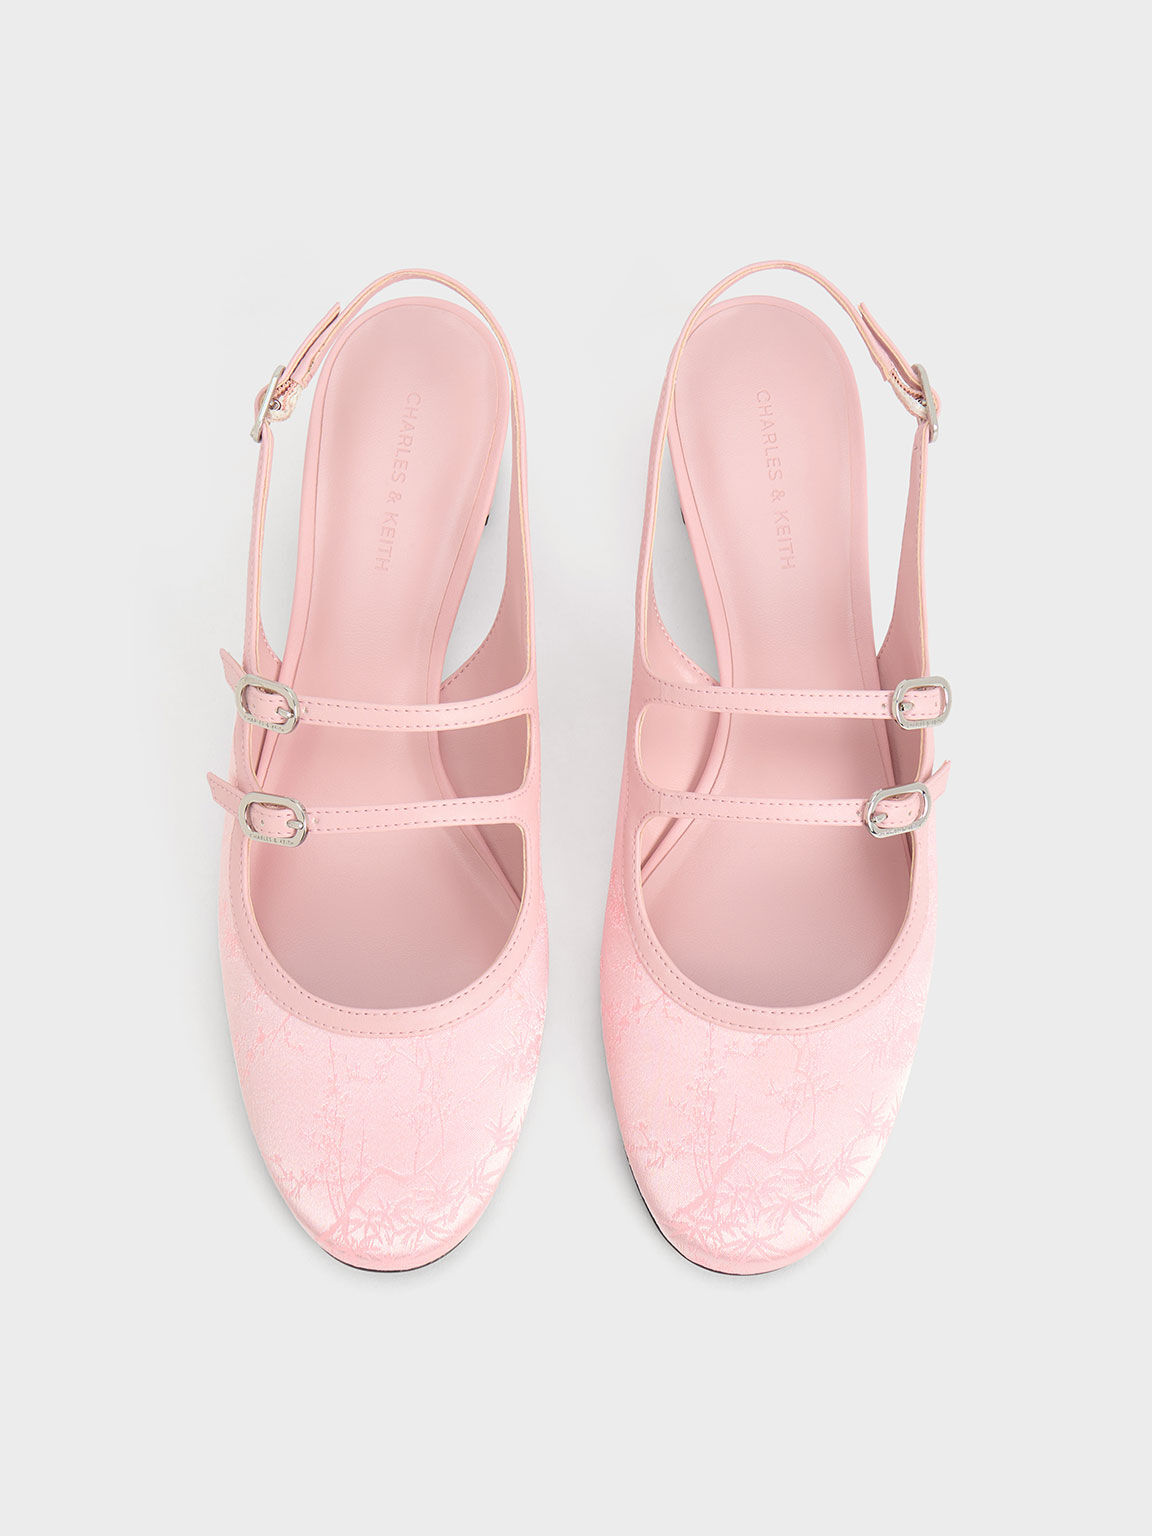 Light Pink Clementine Recycled Polyester Mary Jane Pumps - CHARLES 